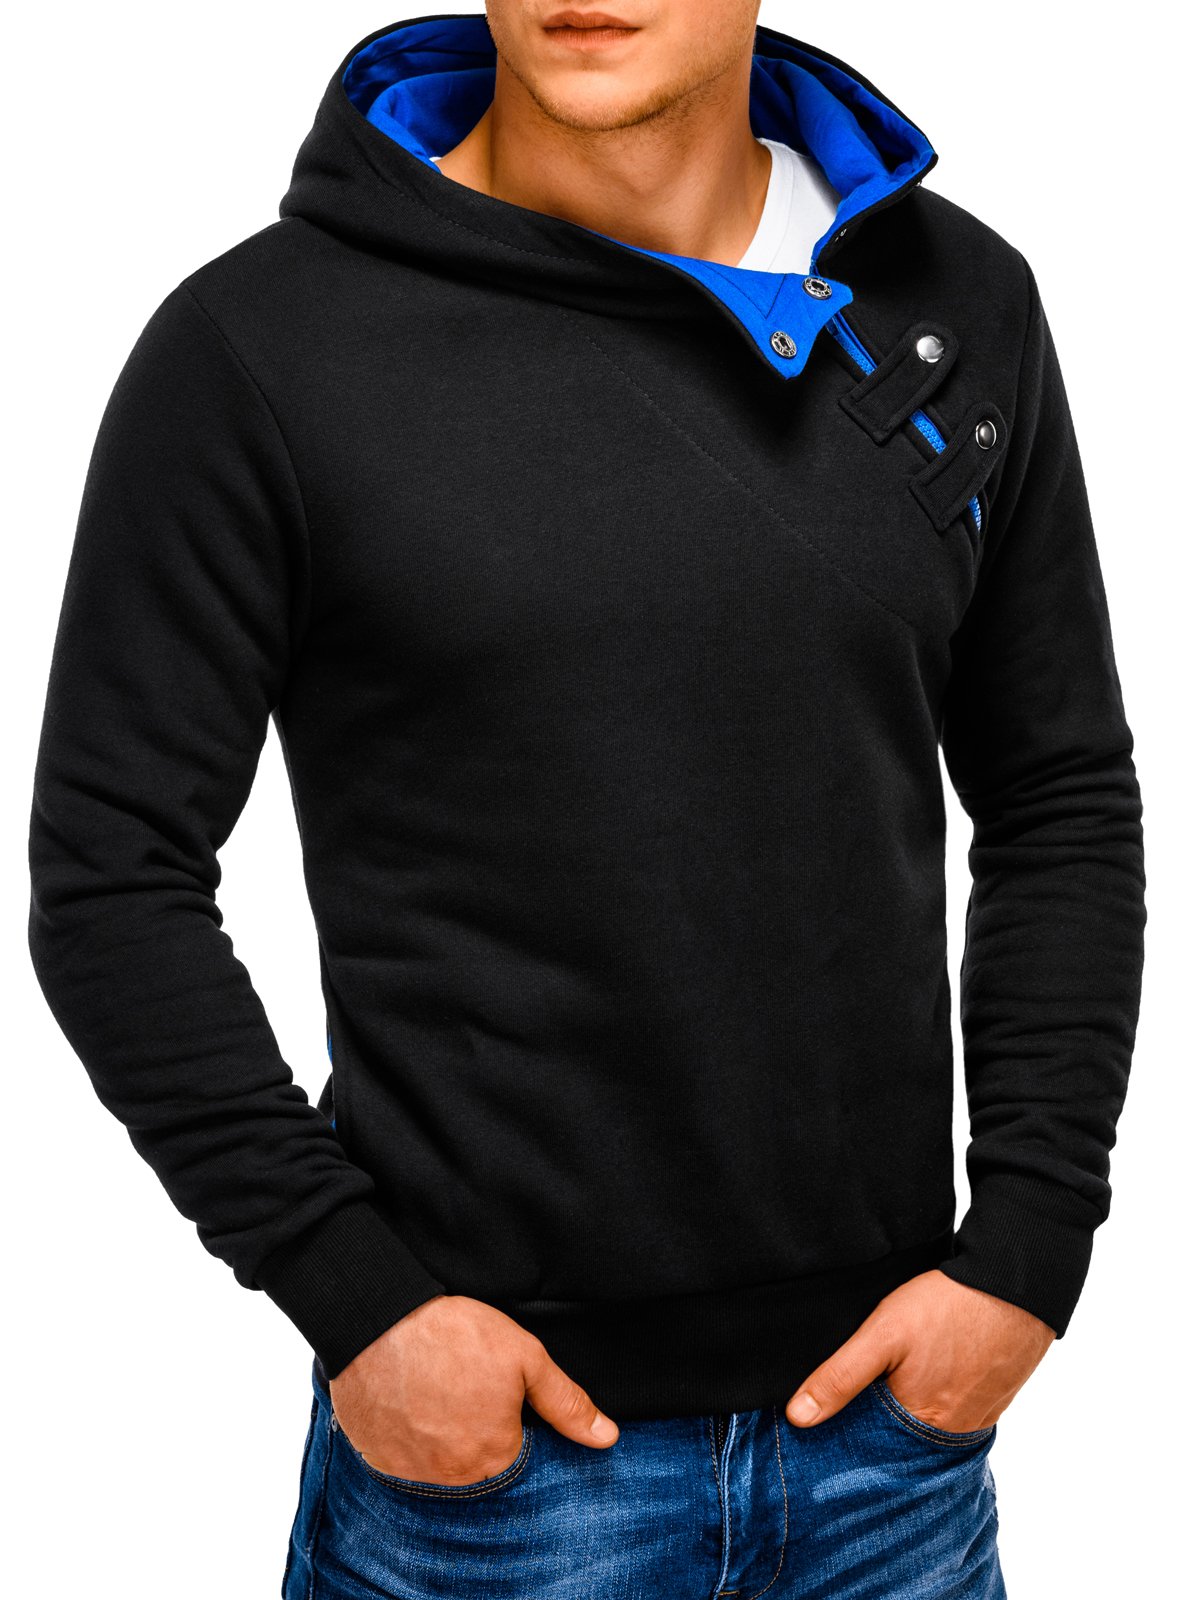 Men's hoodie PACO - black/turquoise | MODONE wholesale - Clothing For Men